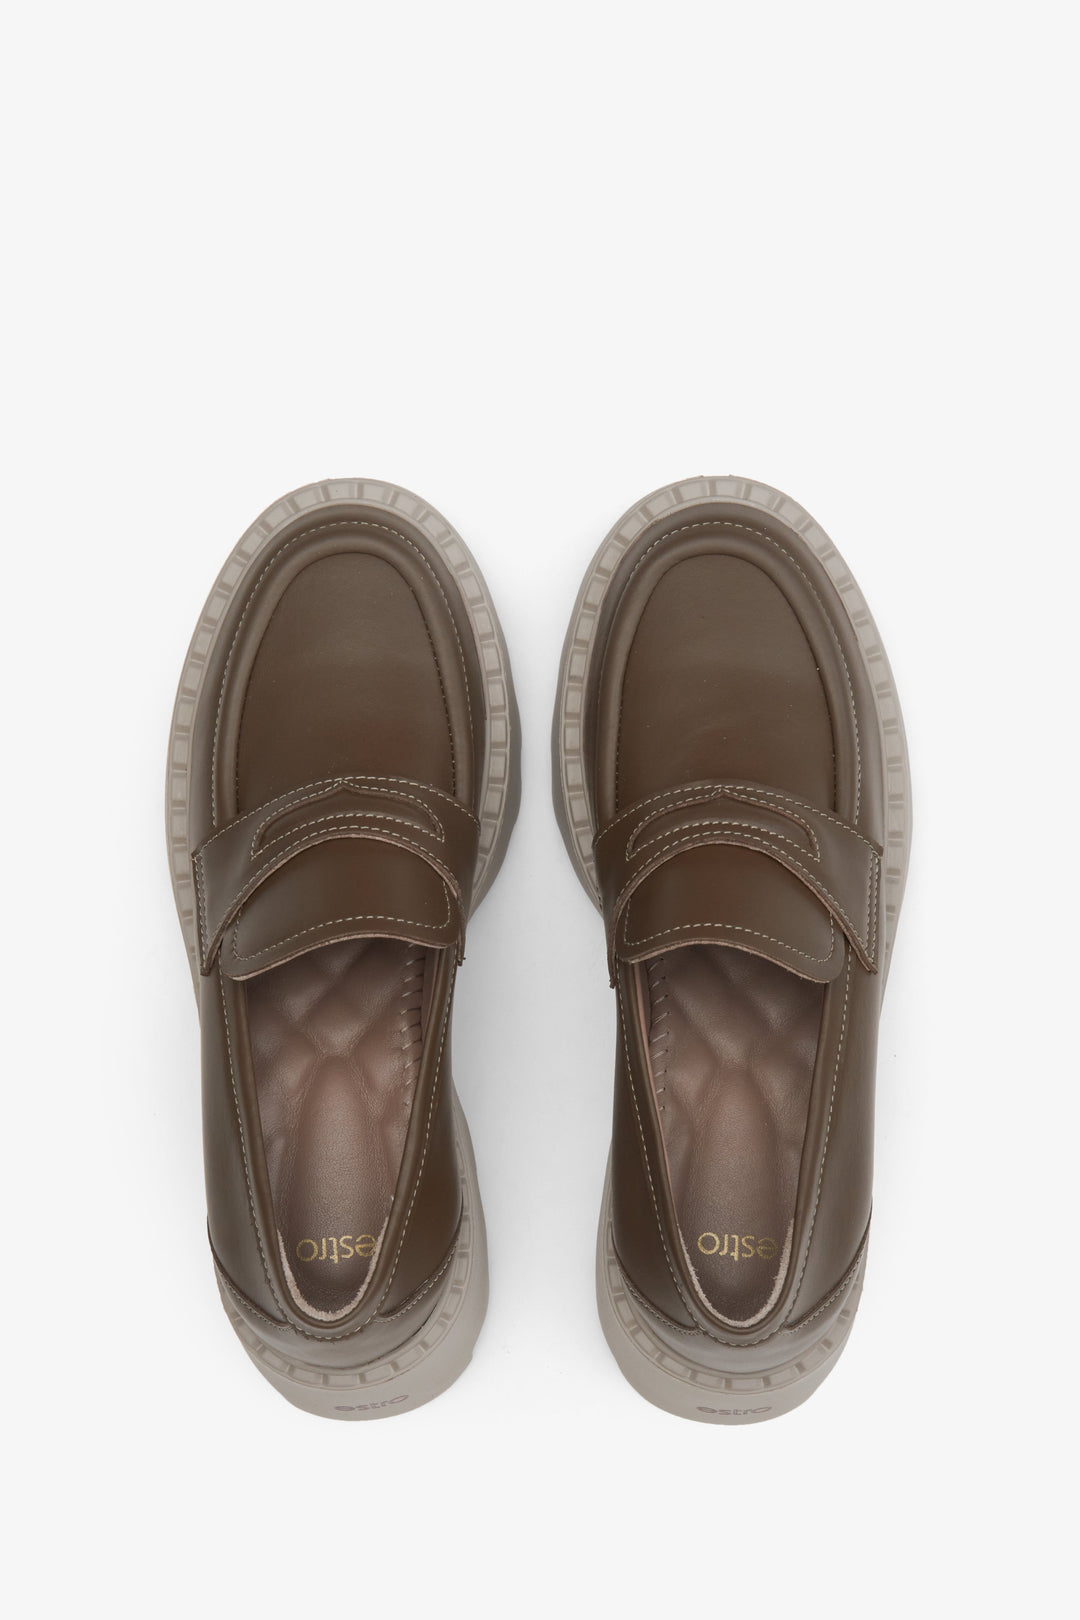 Elegant leather loafers in brown - presentation of the footwear from above.